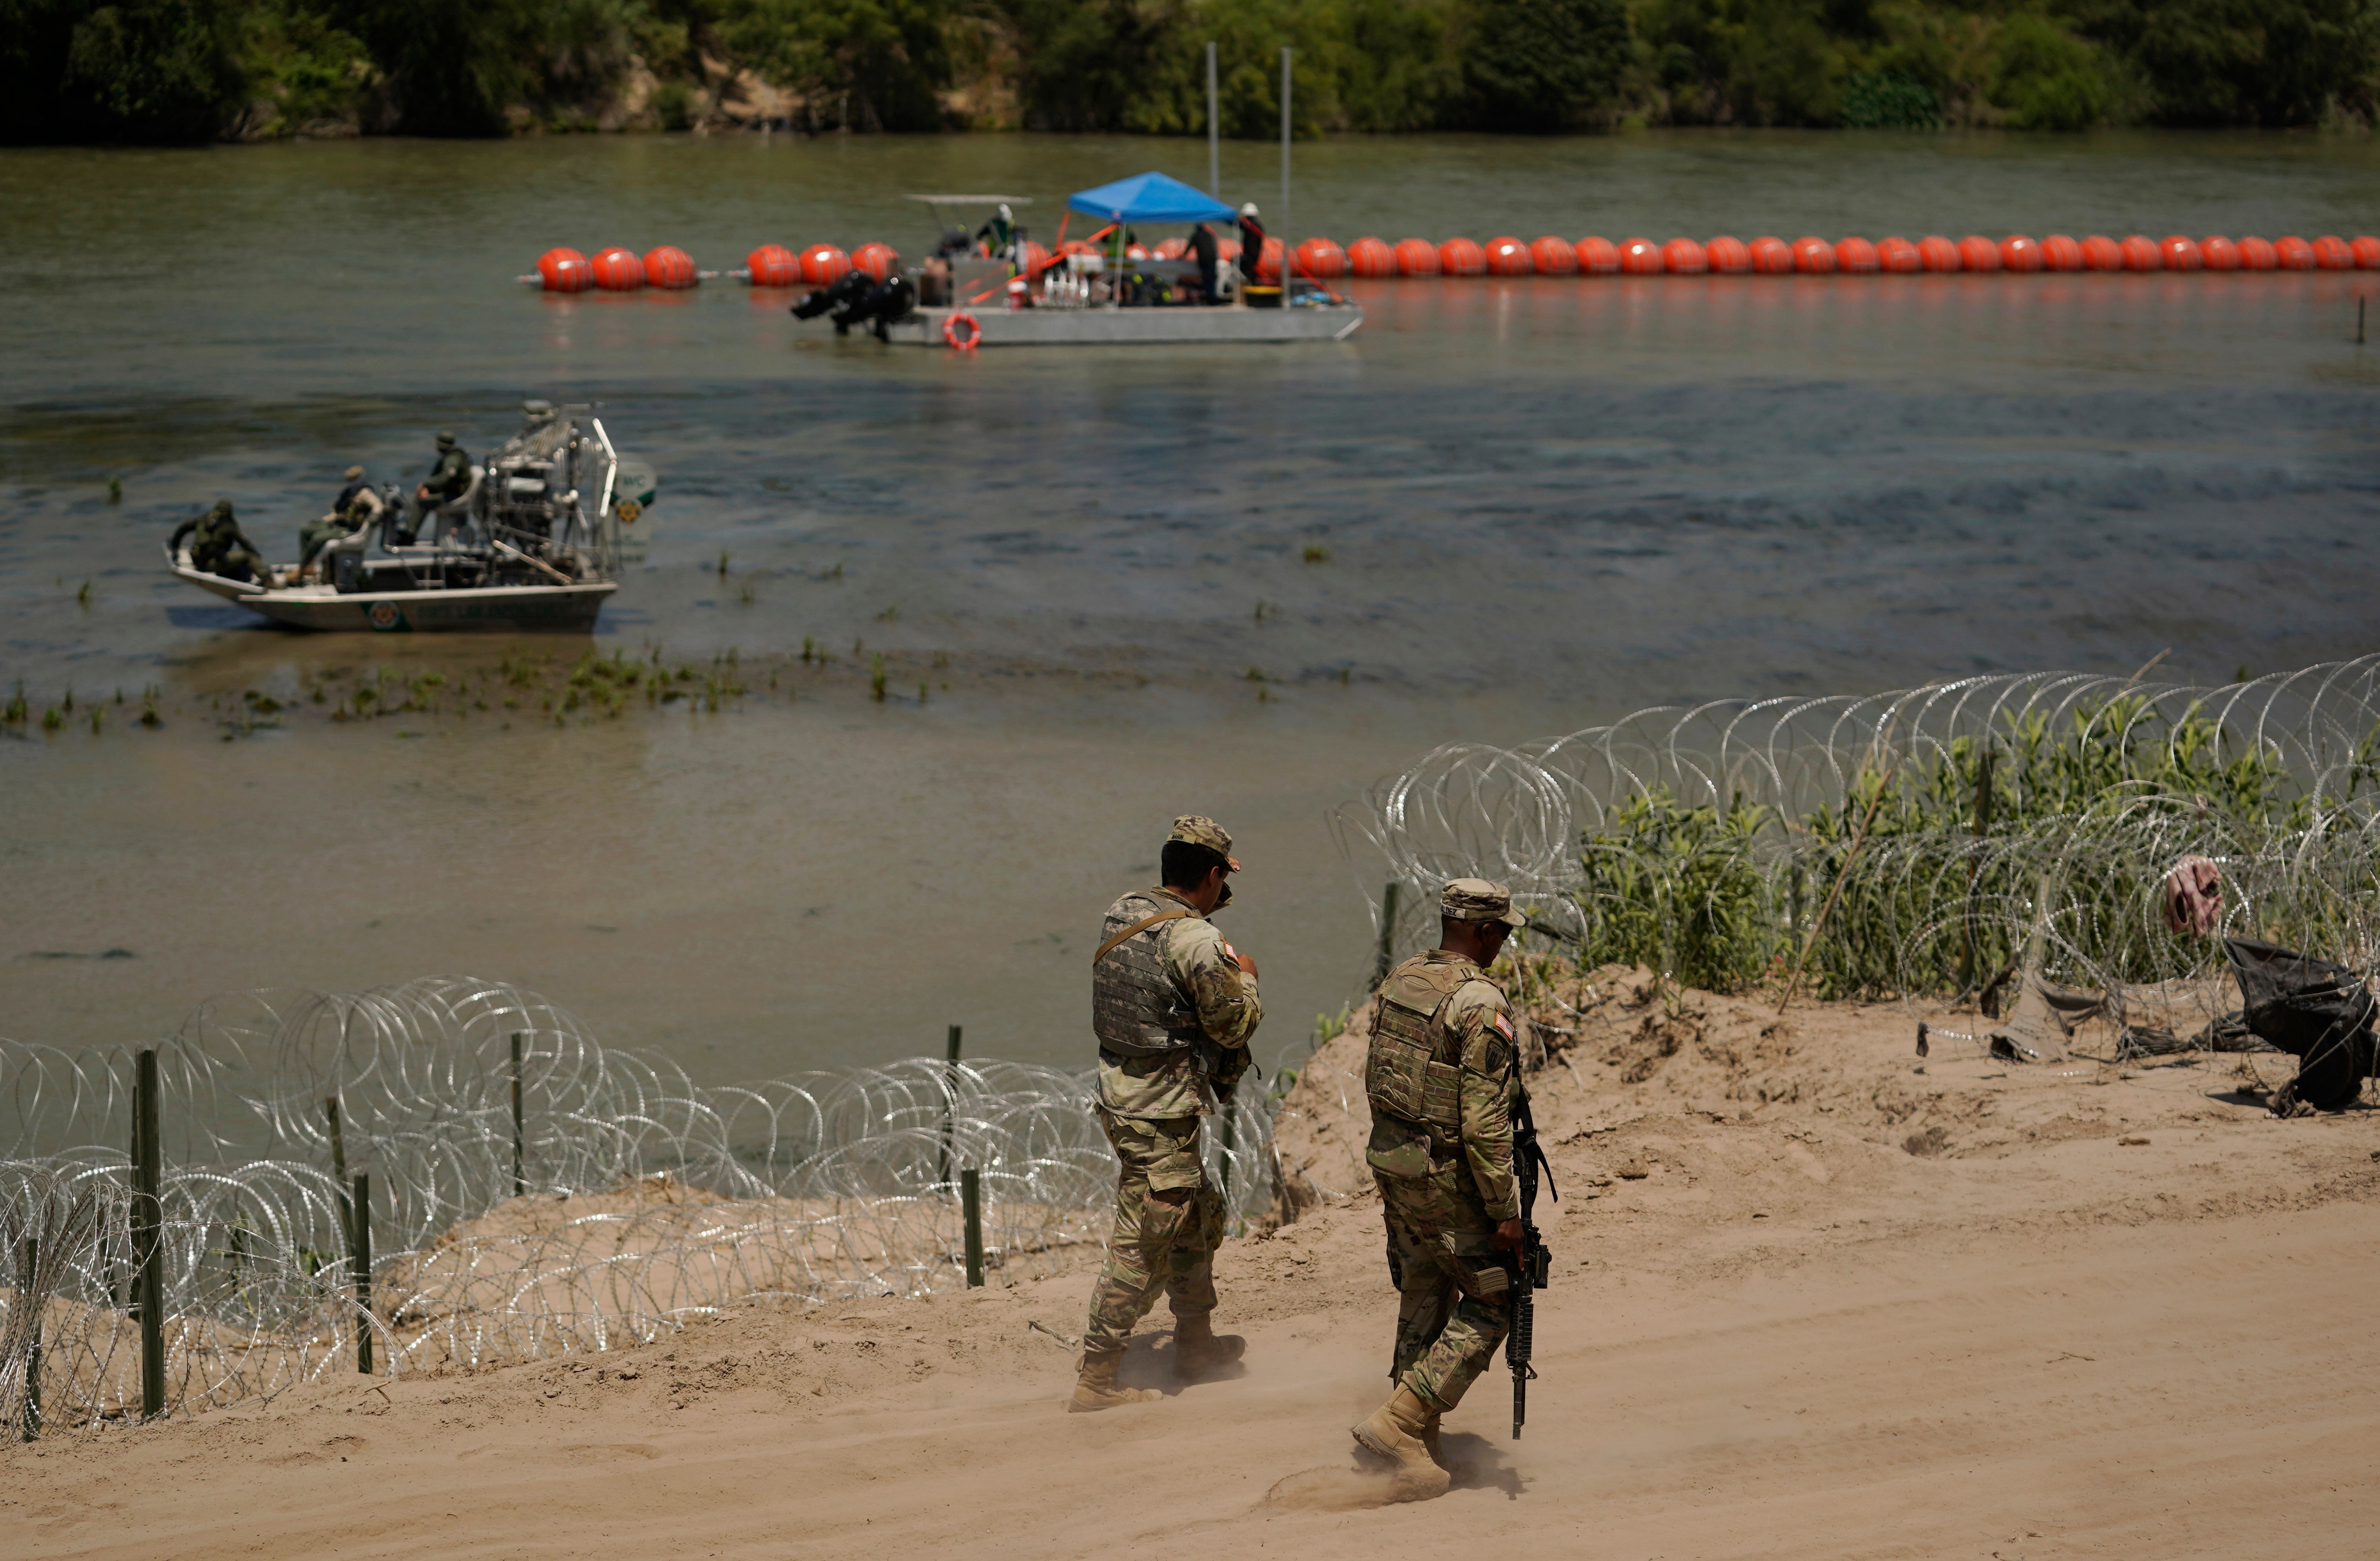 Texas has declared its under ‘invasion’ by migrants